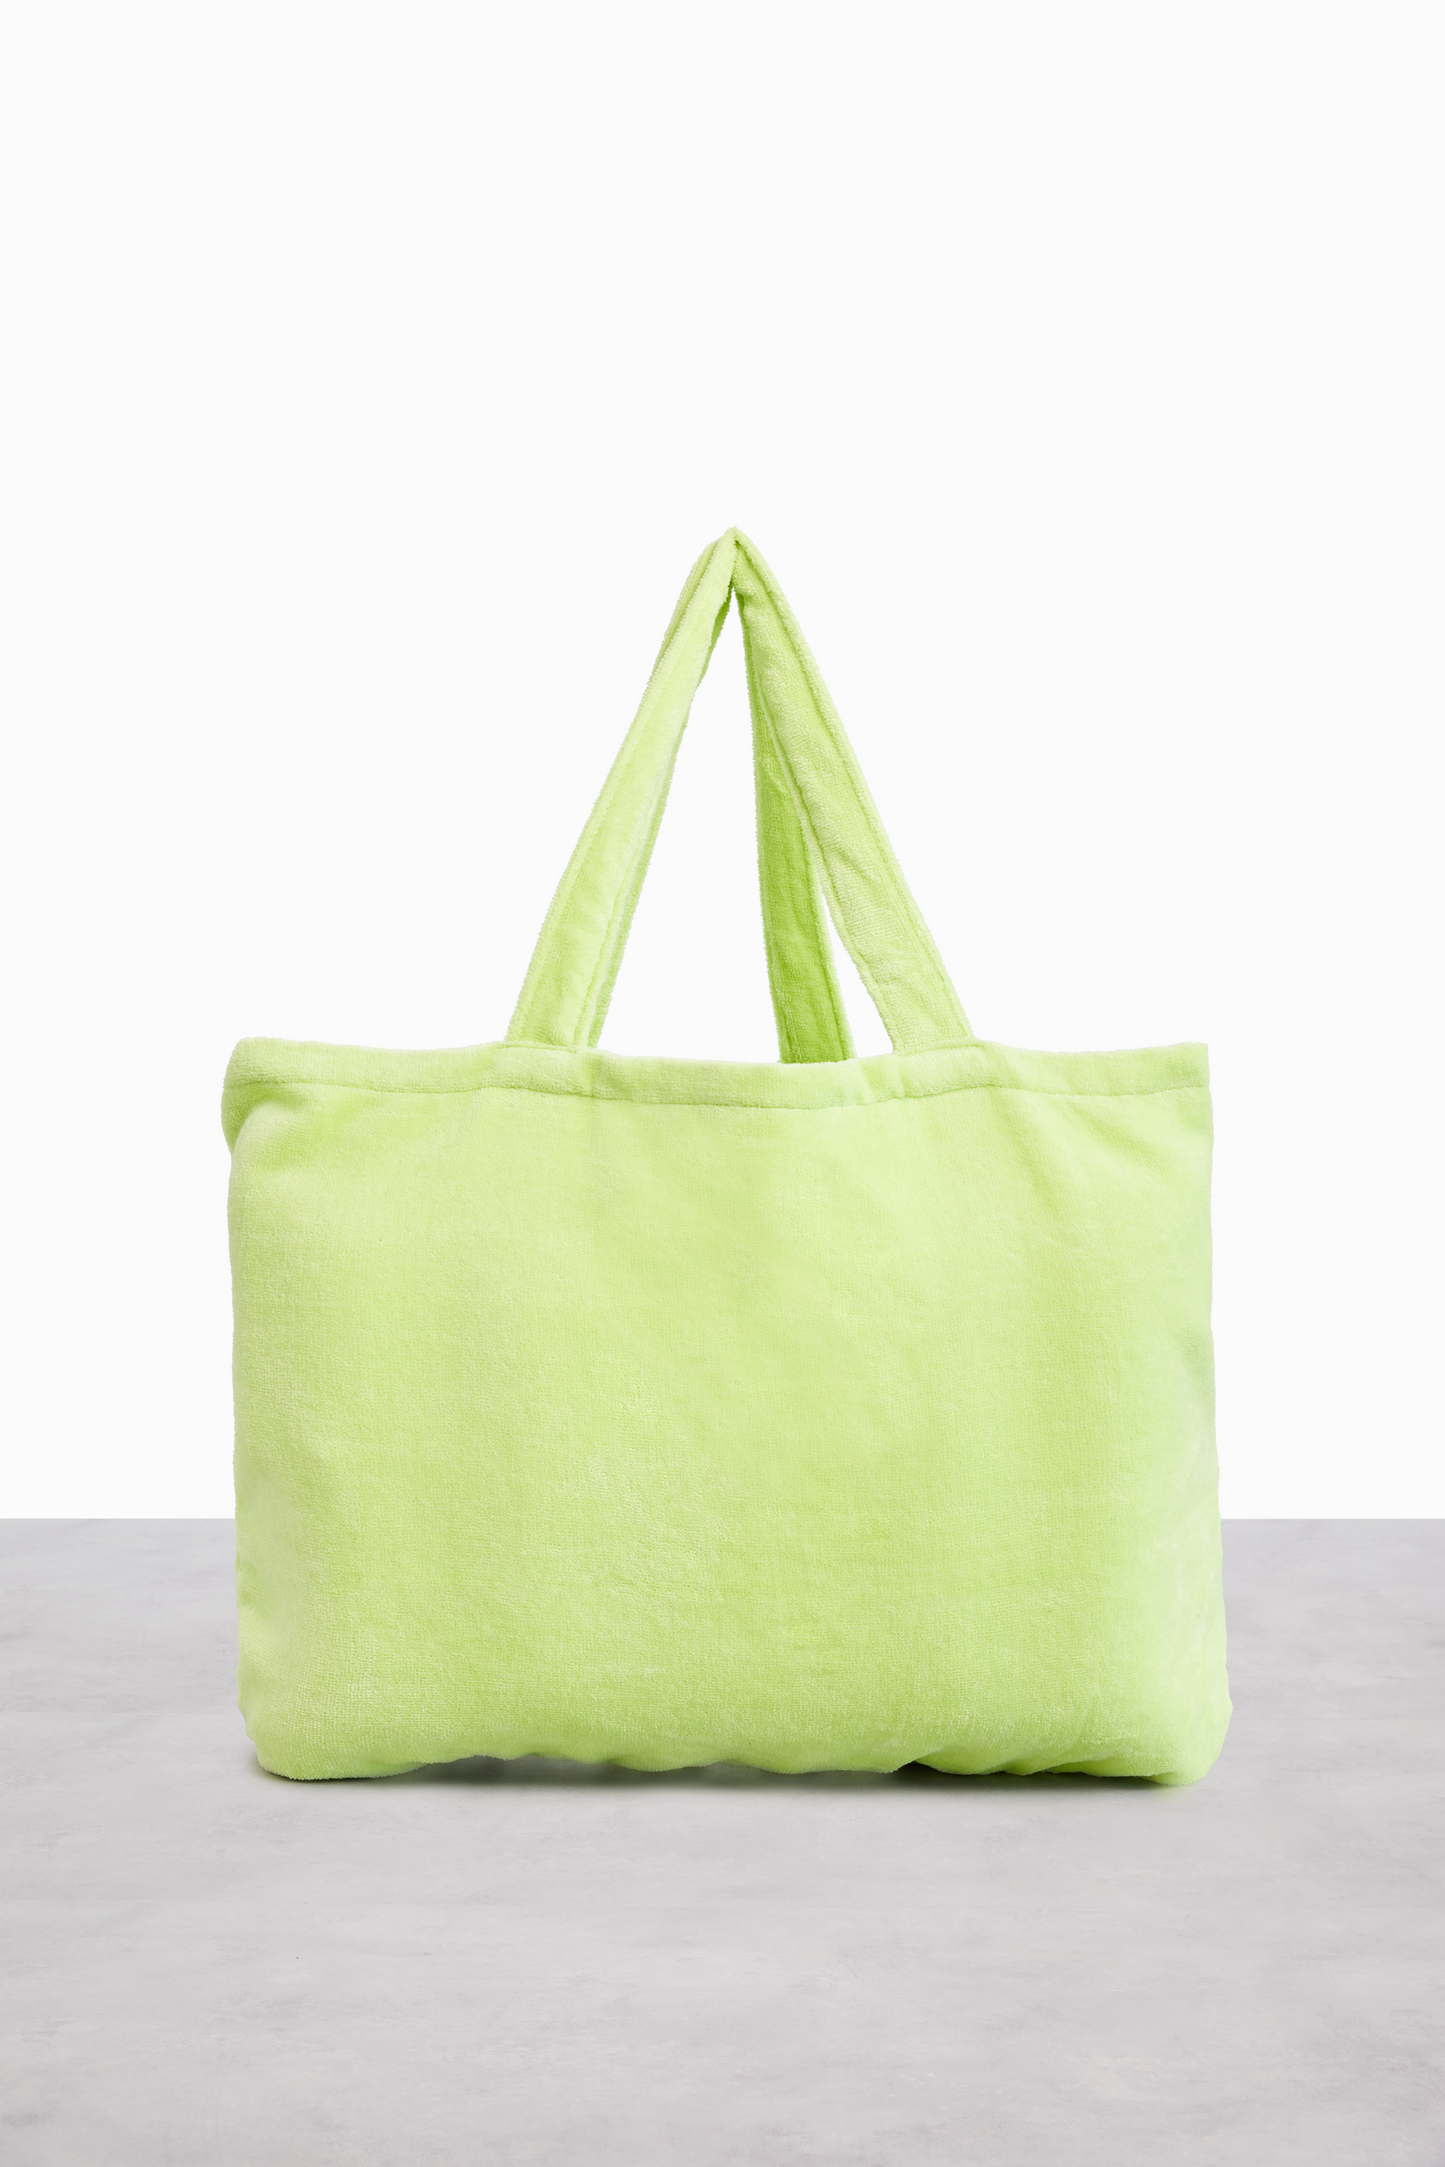 The Terry Towel Tote in Citron